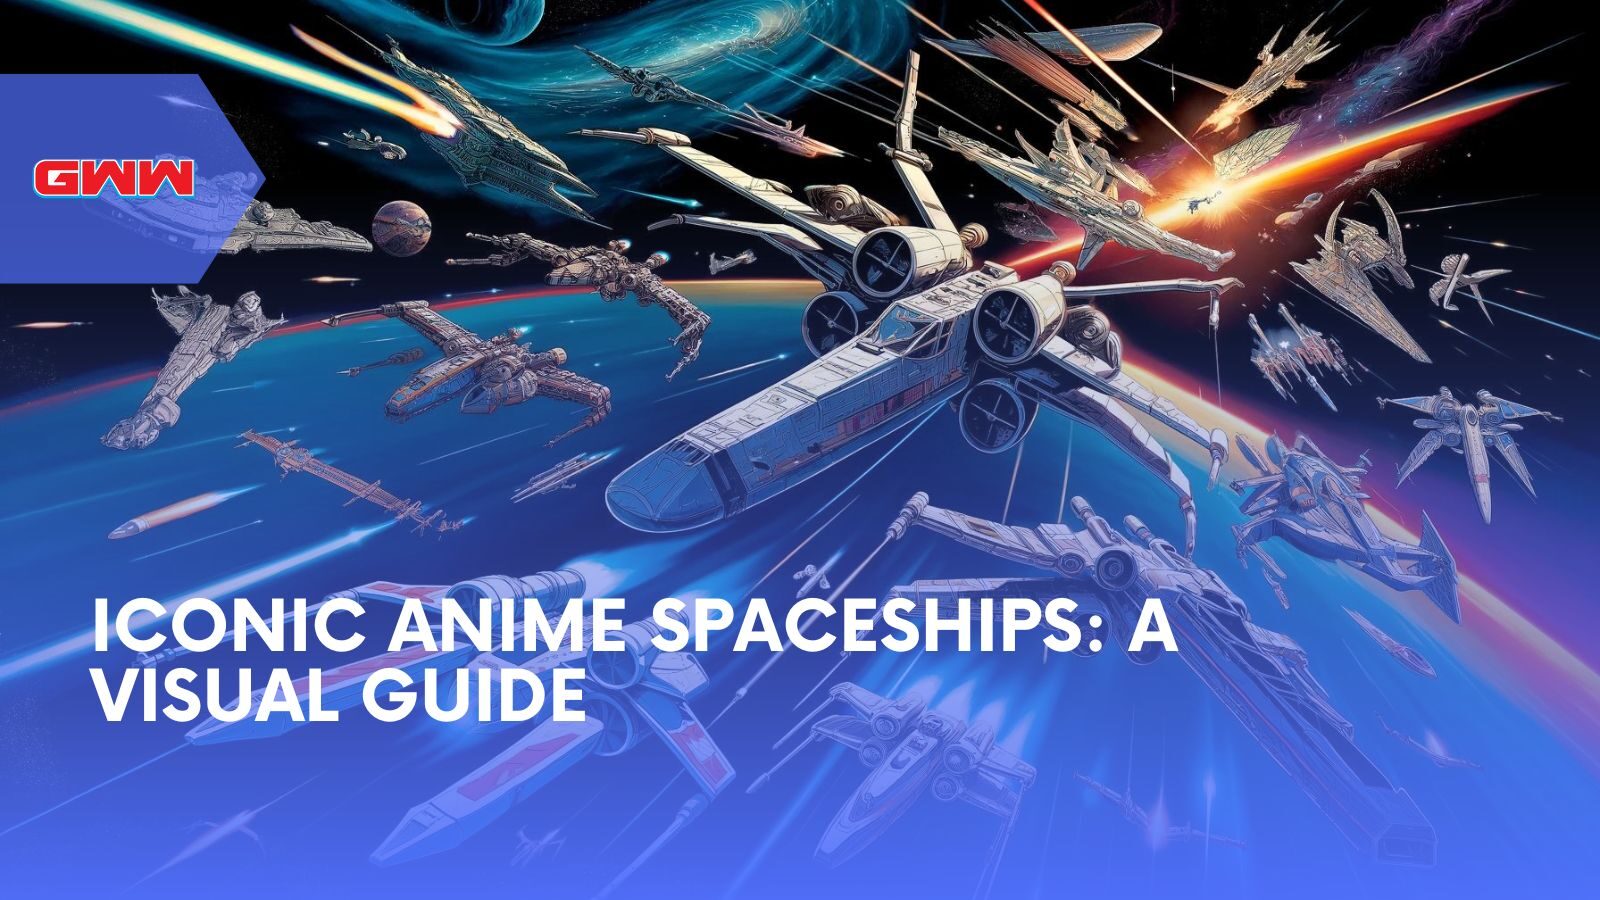 Iconic Anime Spaceships: A Visual Guide